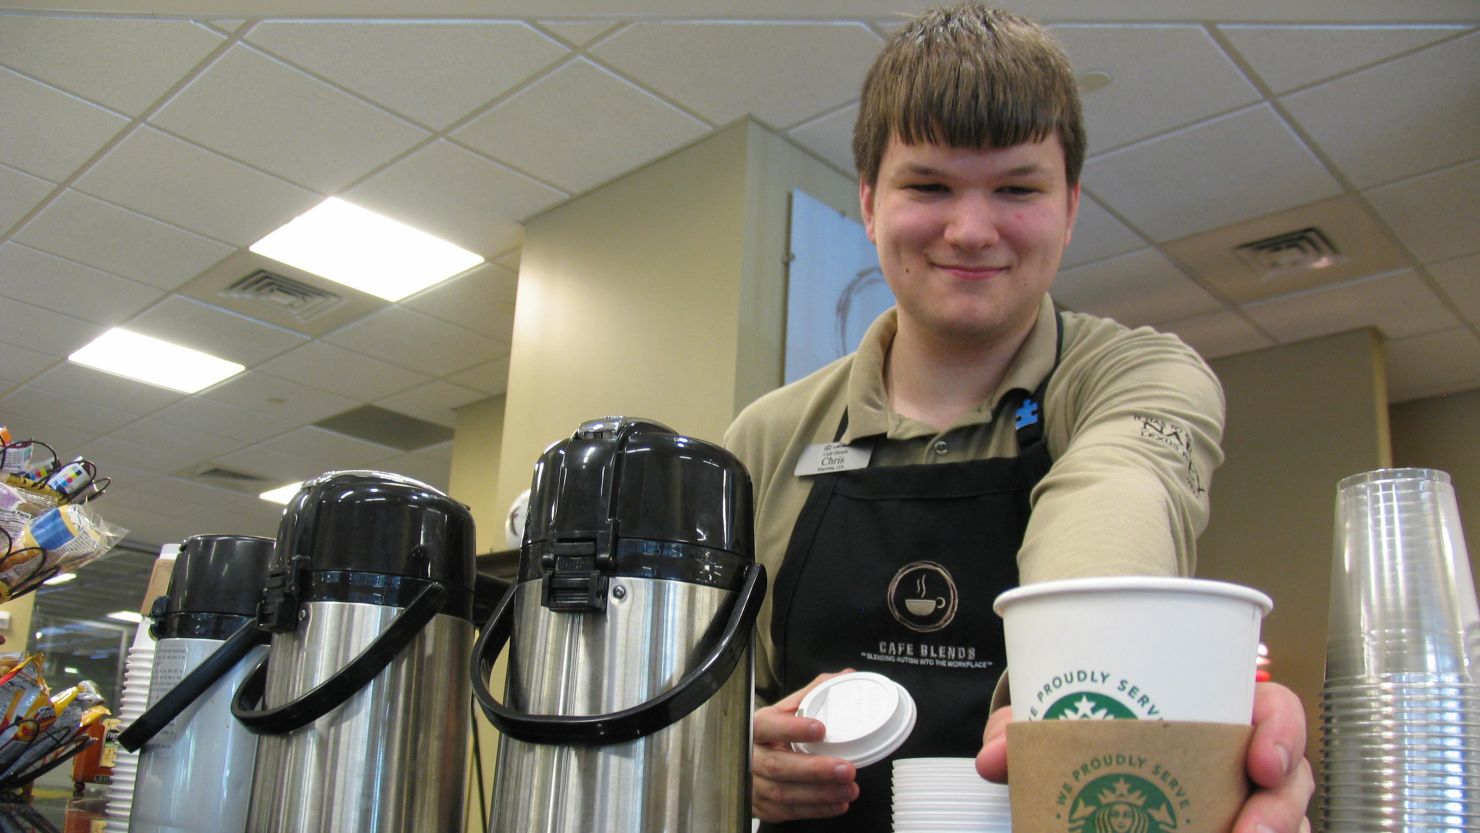 Chris Pavlak stands behind the coffee bar at Cafe Blends.  The cafe is staffed by young adults on the autism spectrum.